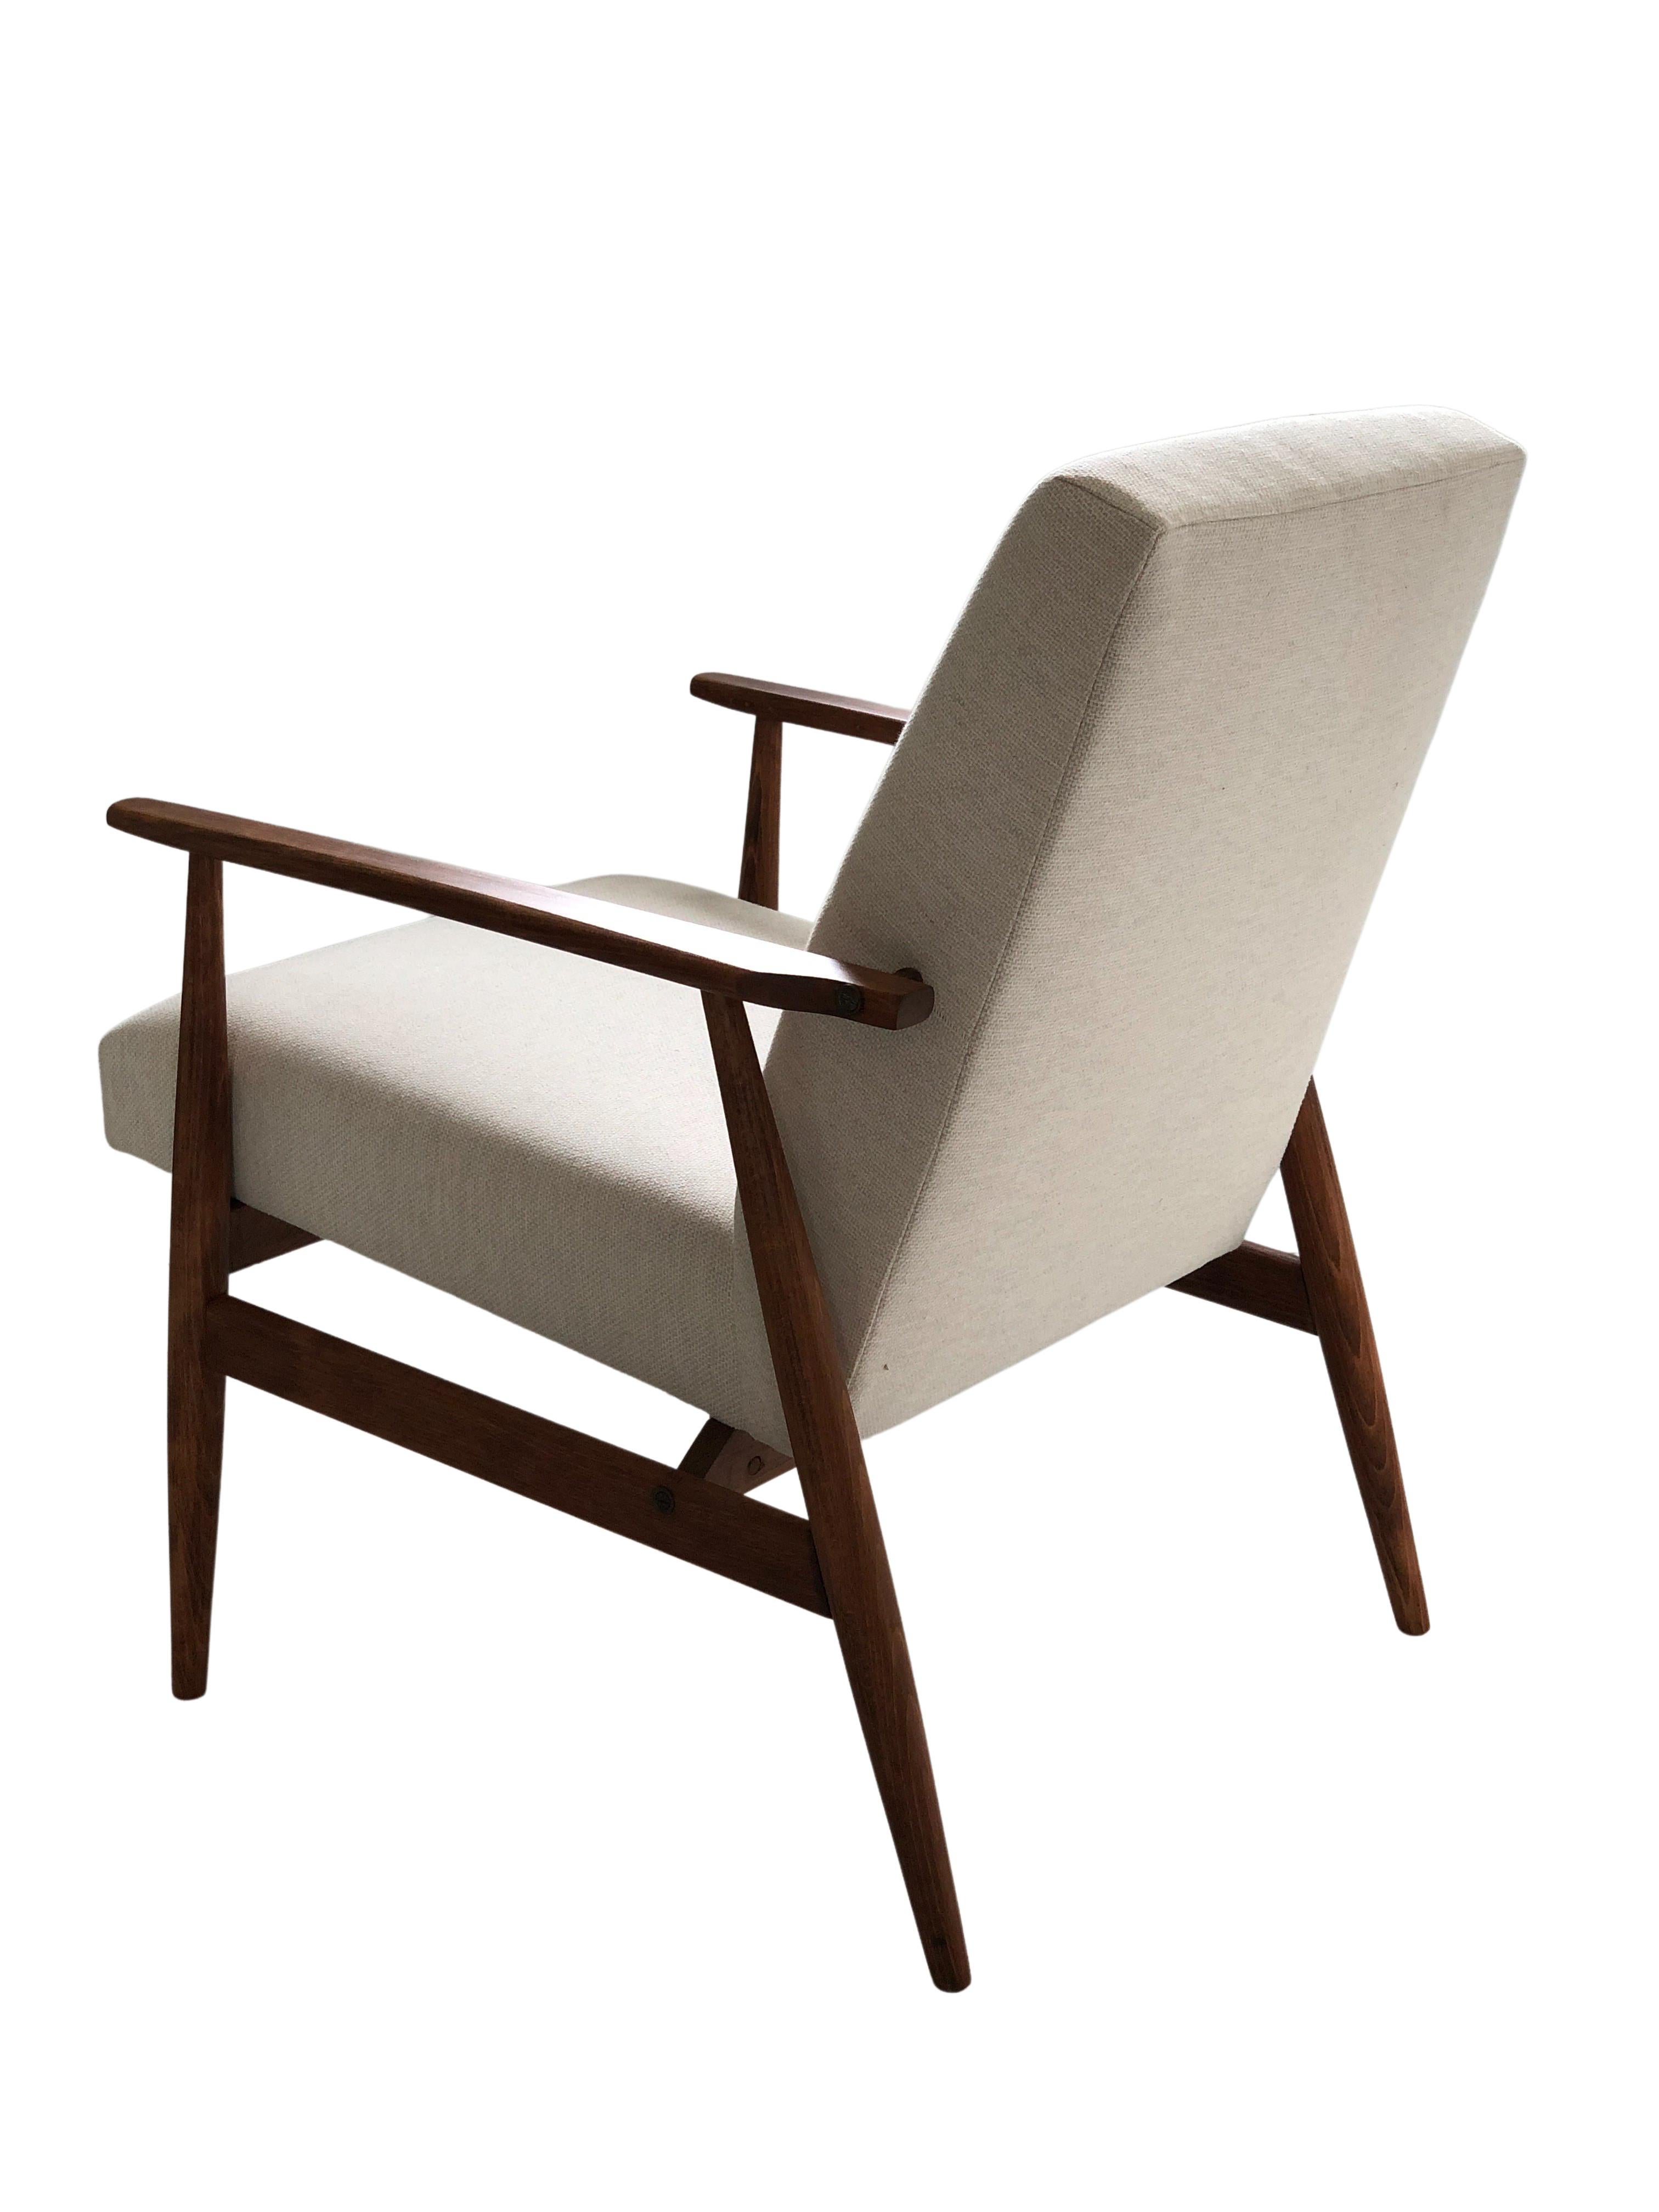 Polish Mid Century Armchair by Henryk Lis in Beige, Europe, 1960s, For Sale